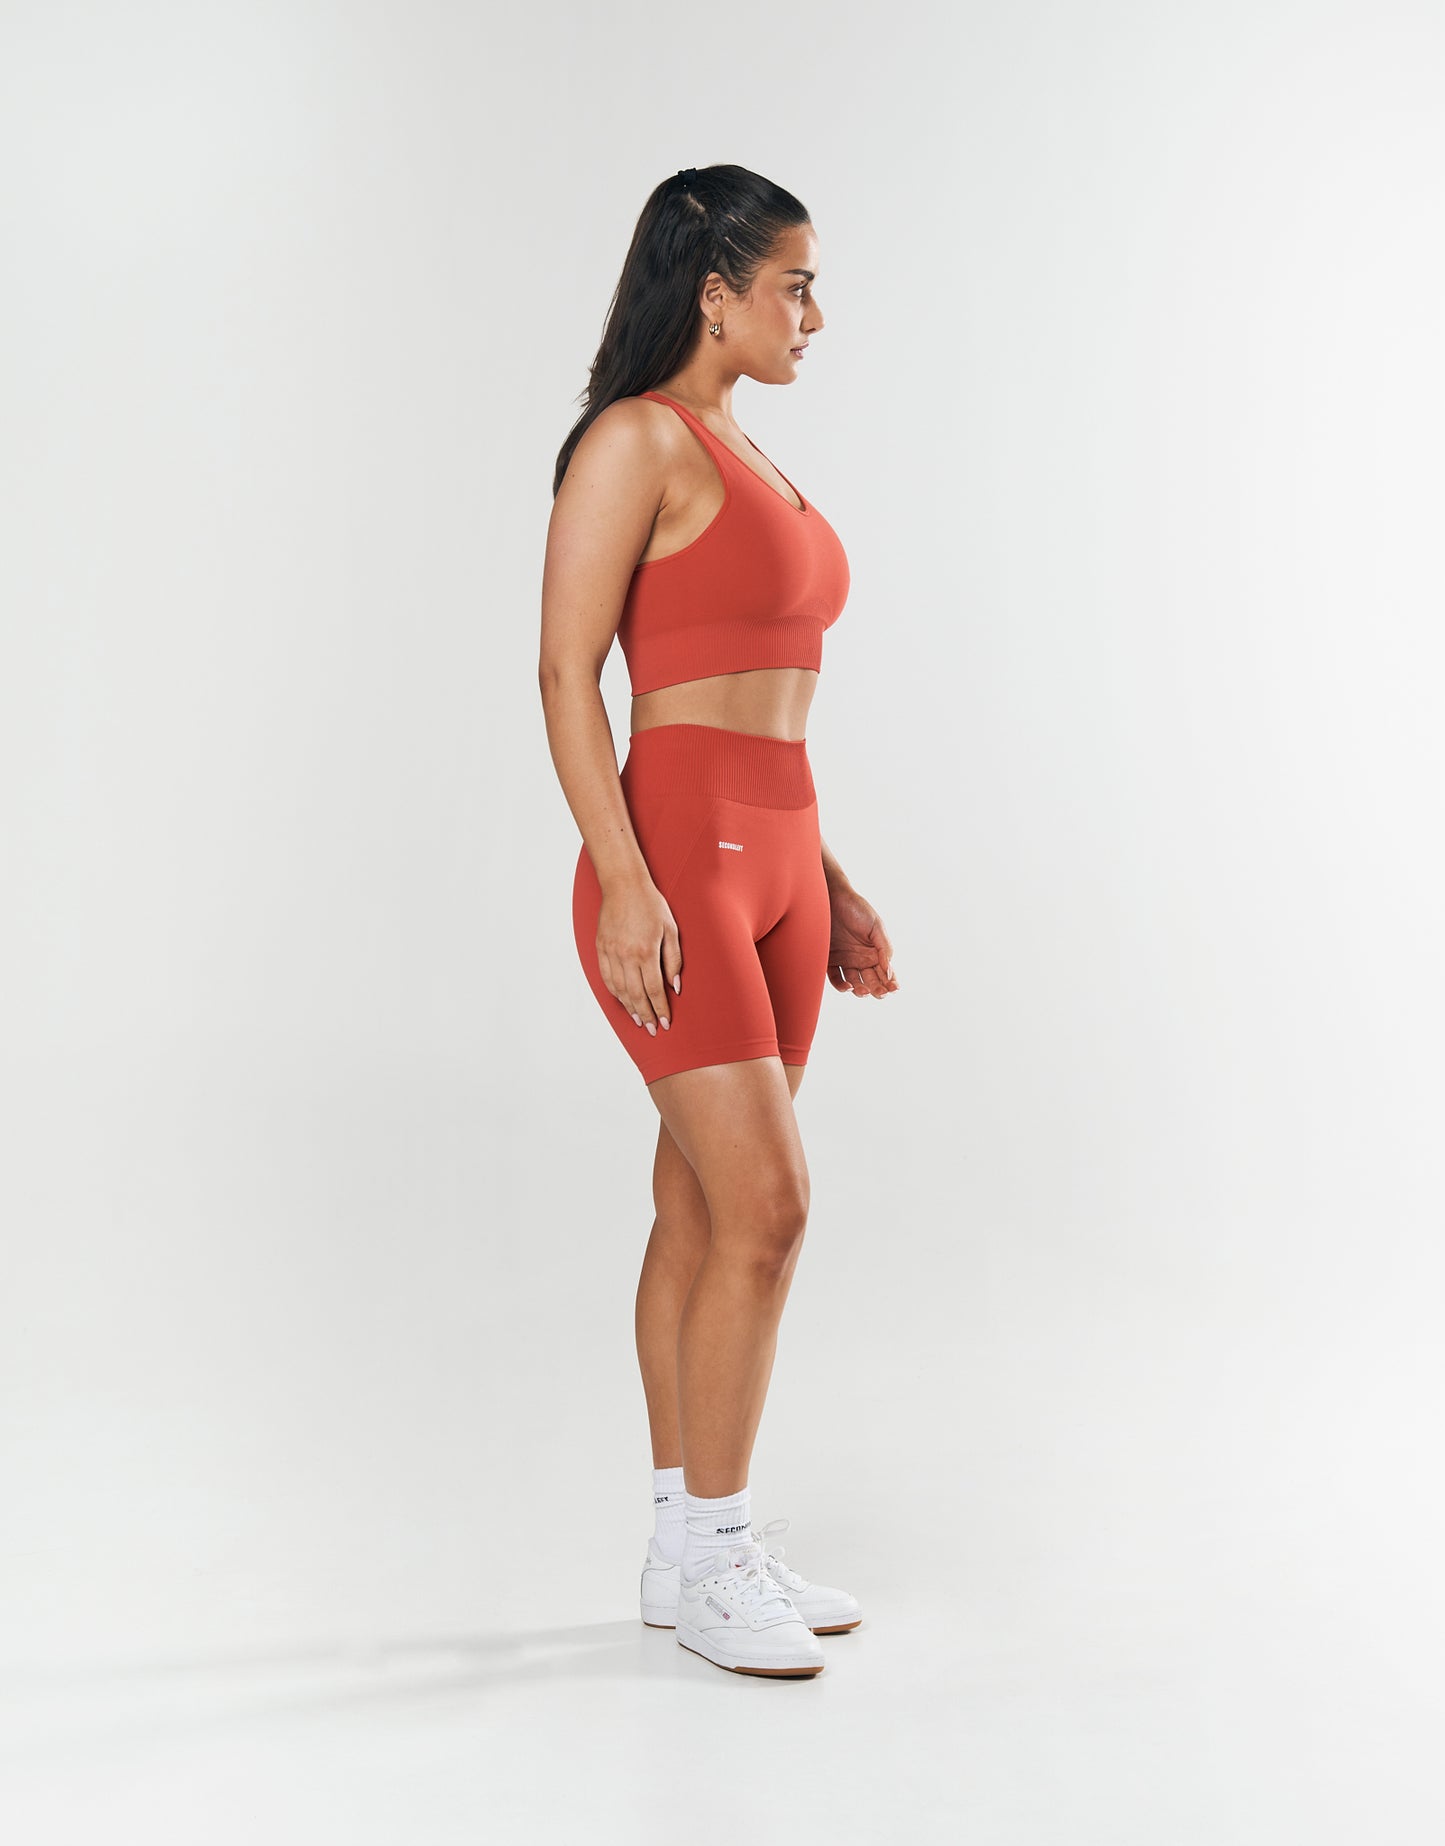 SL Seamless Strappy Crop - Red